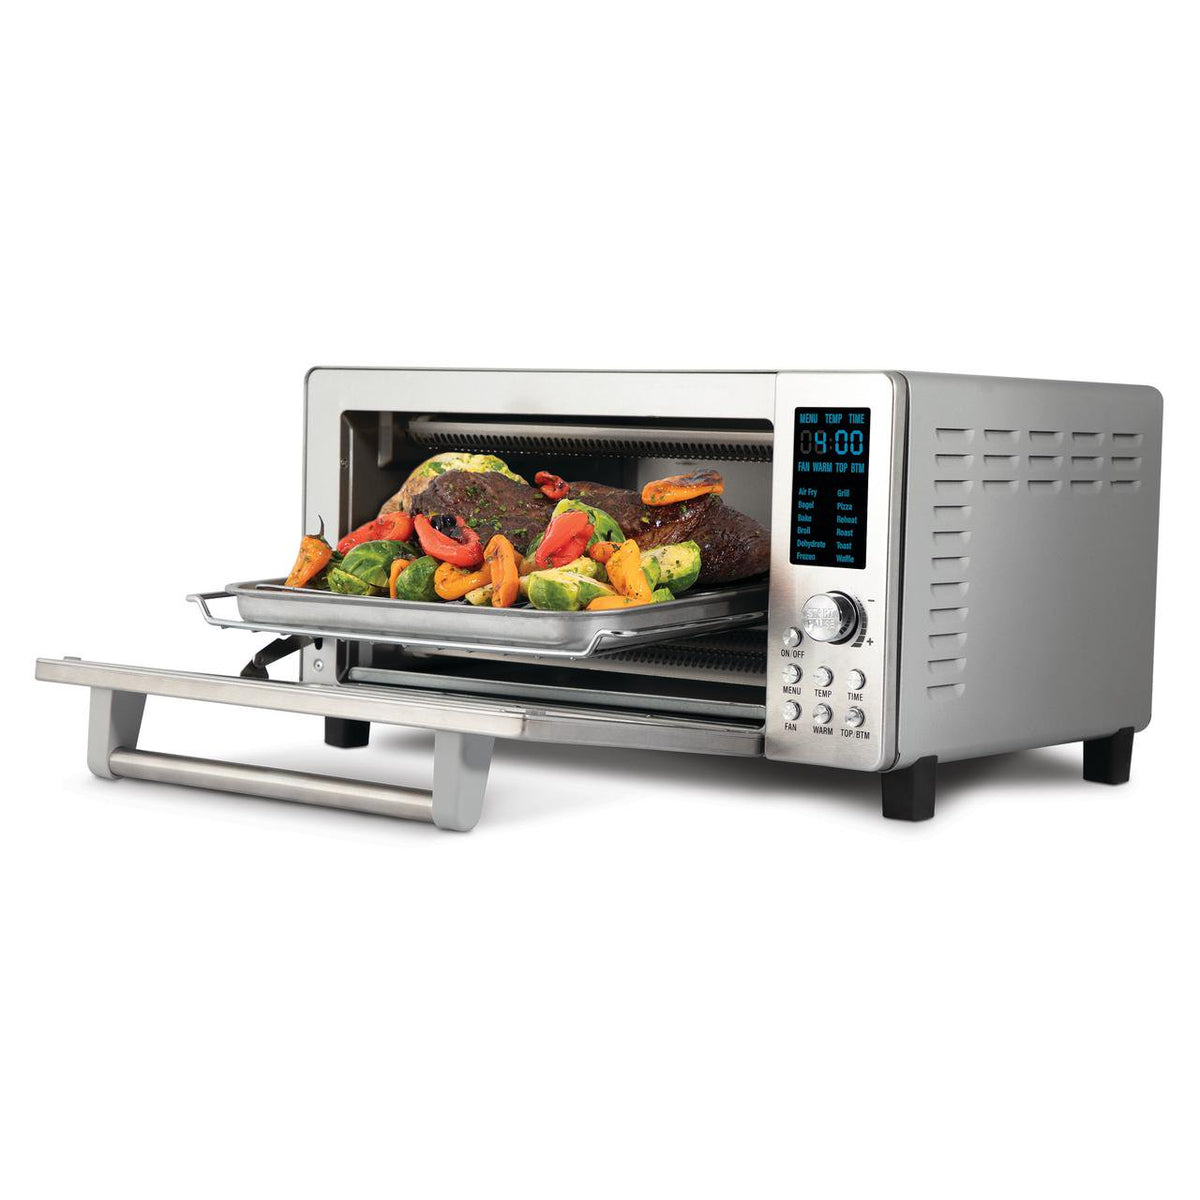 NuWave 20831 Bravo 0.7 cubic foot Air Fryer Toaster Oven